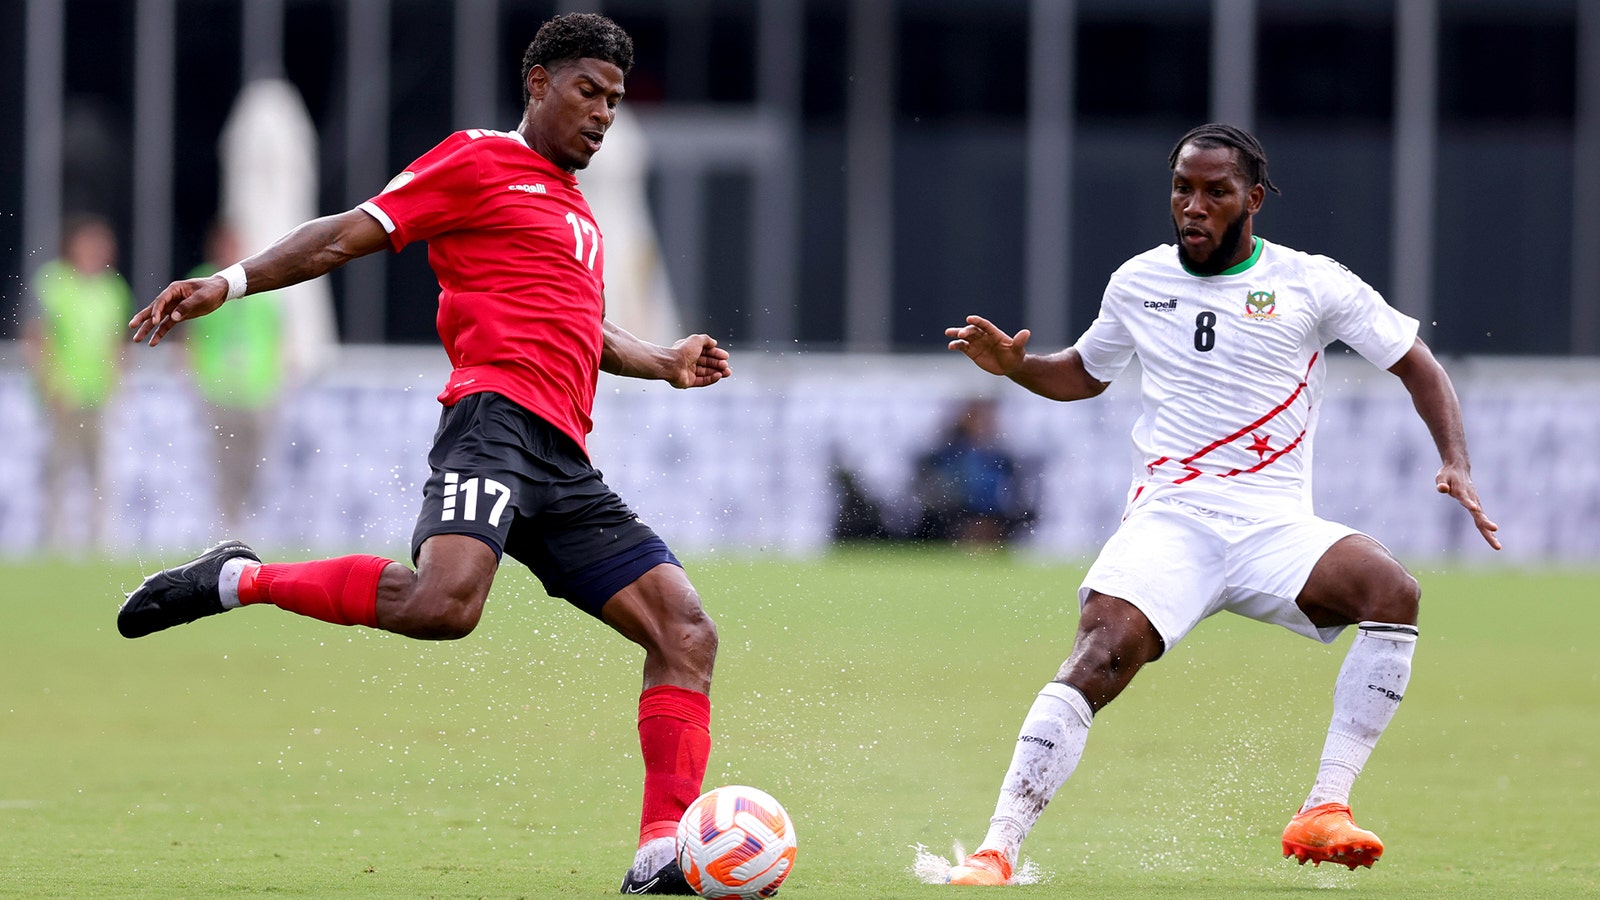 Trinidad and Tobago vs. St. Kitts and Nevis highlights